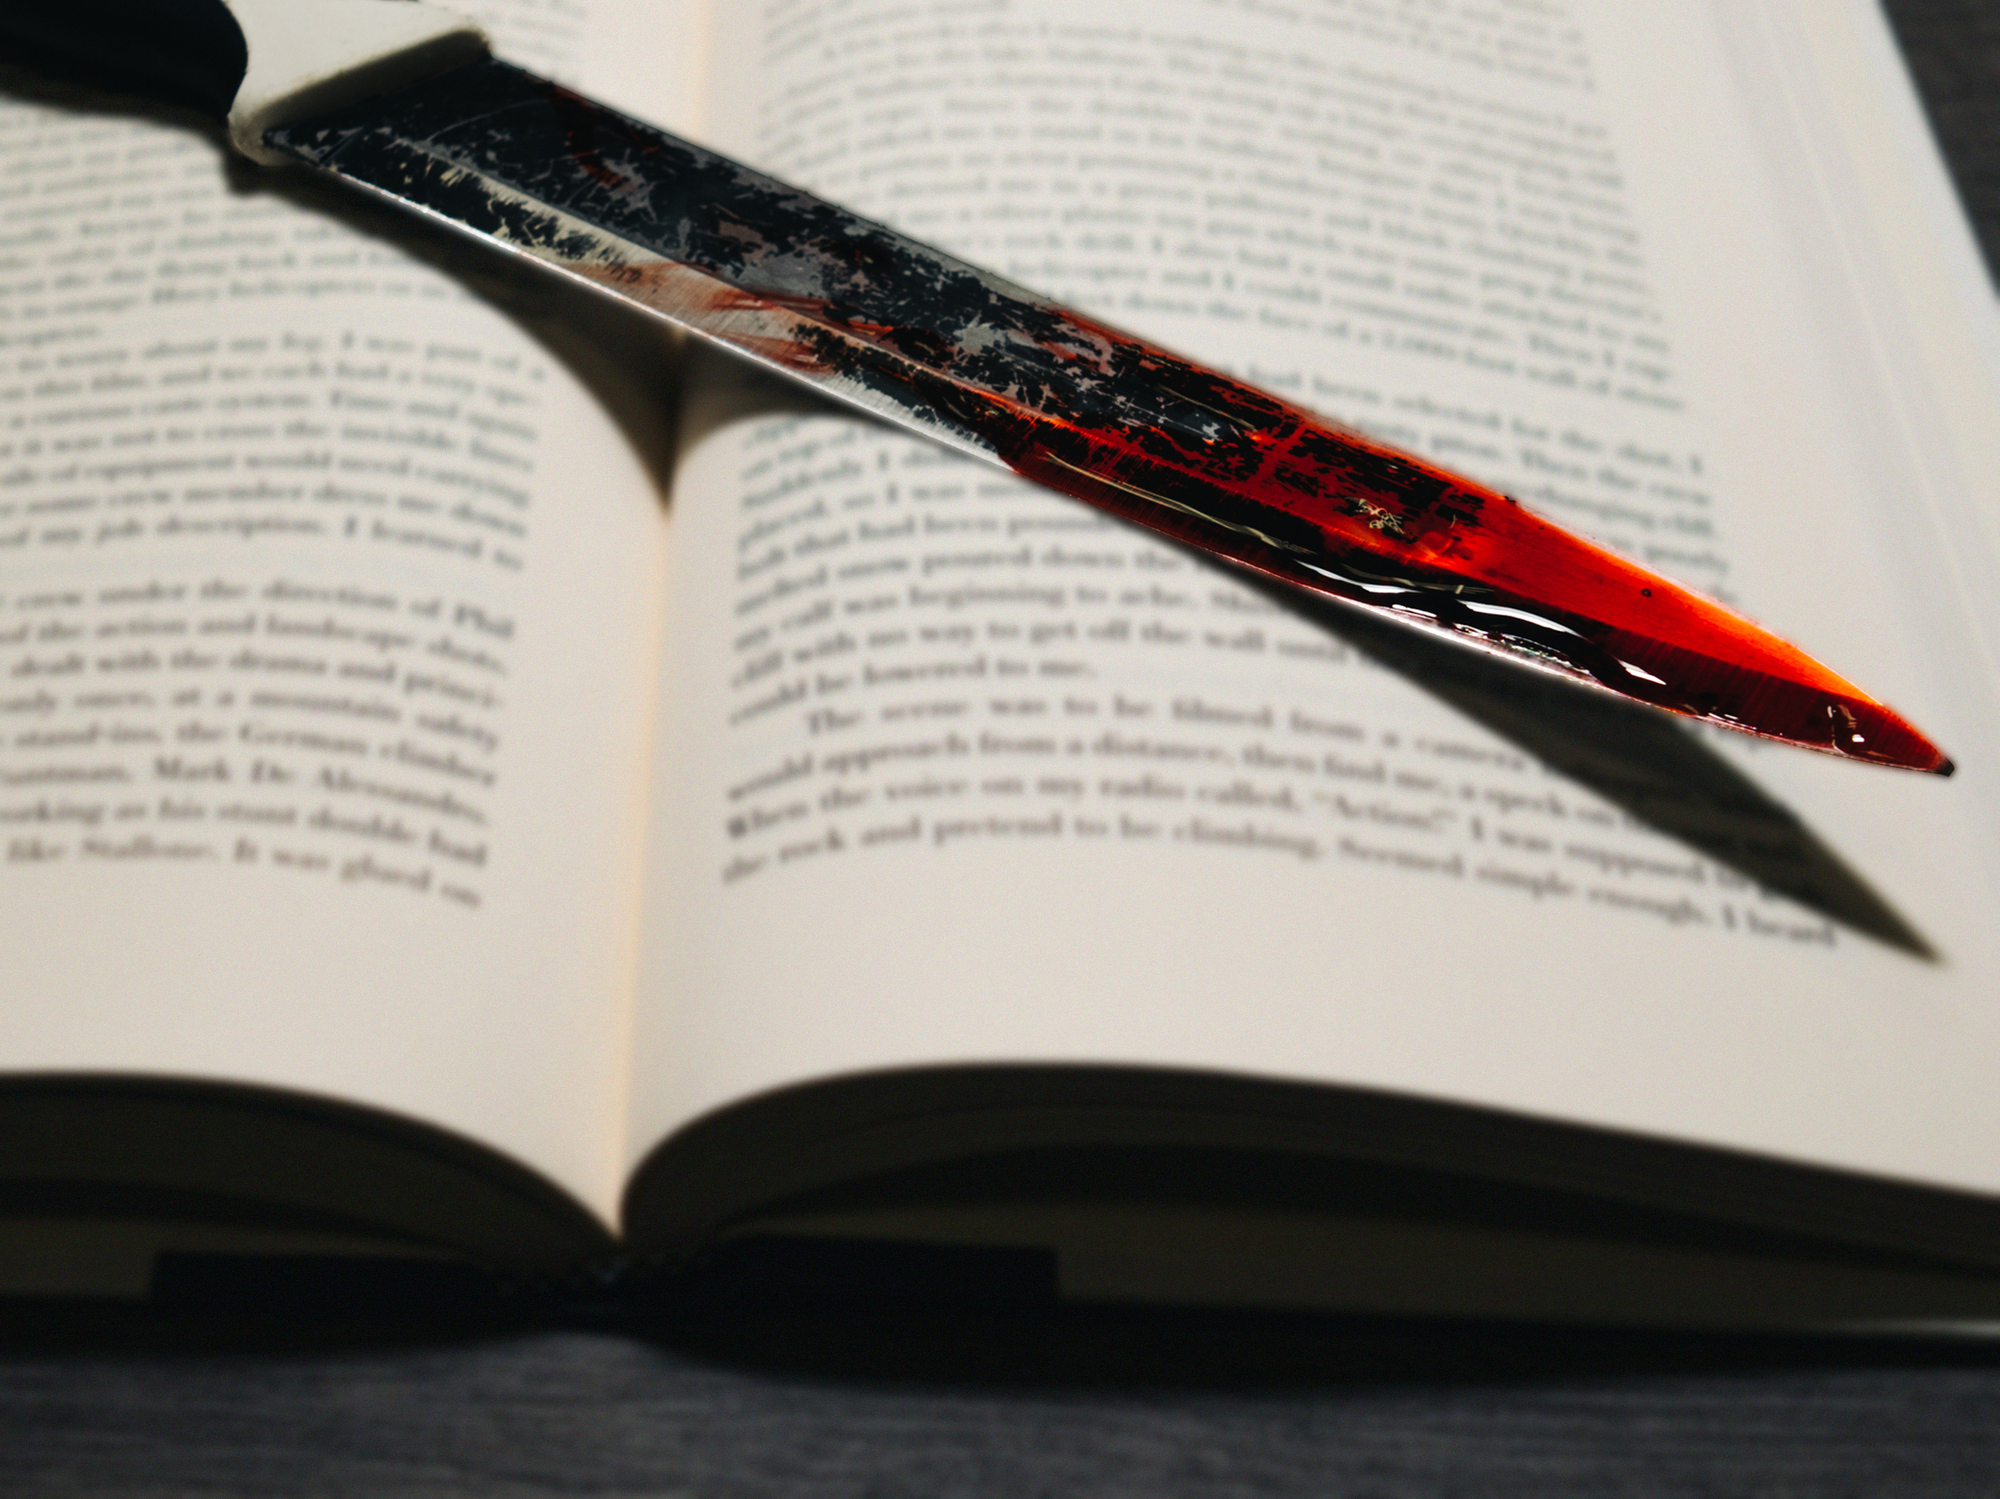  6 horror novels to read this winter 